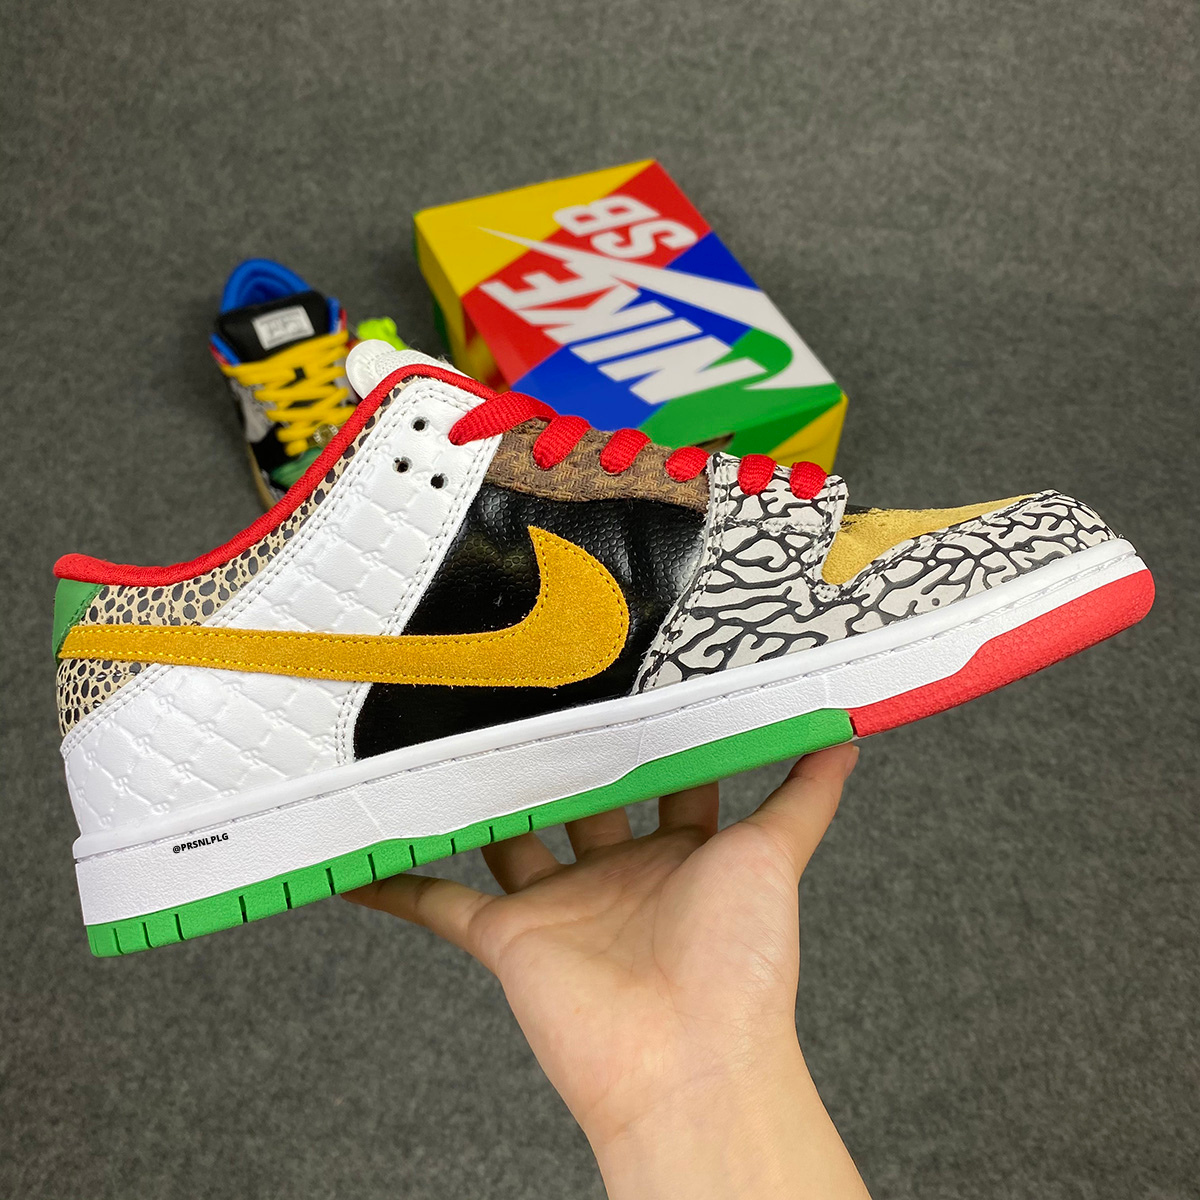 Dunk Low SB 'What The Paul'